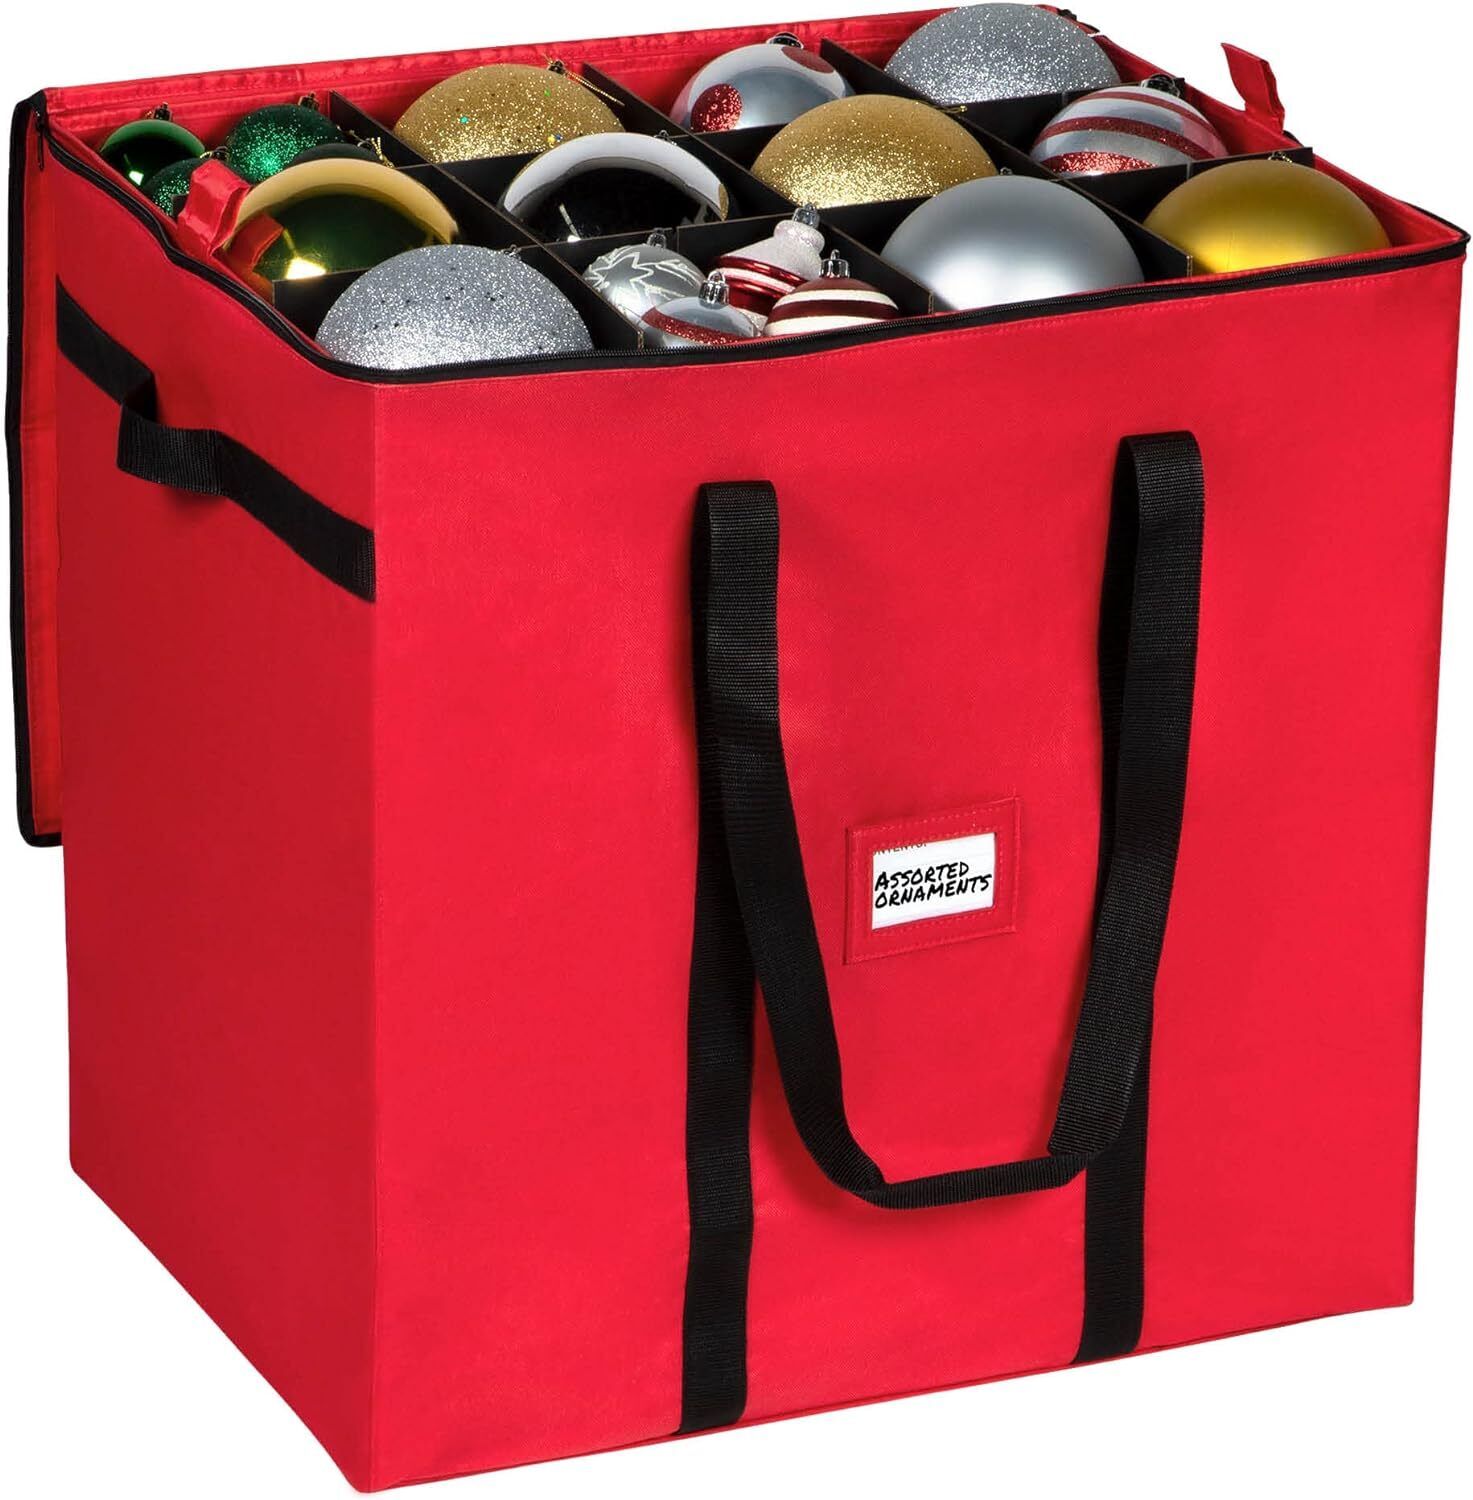 Christmas Ornament Storage Container - Heavy Duty 600D Tear Resistant Material.